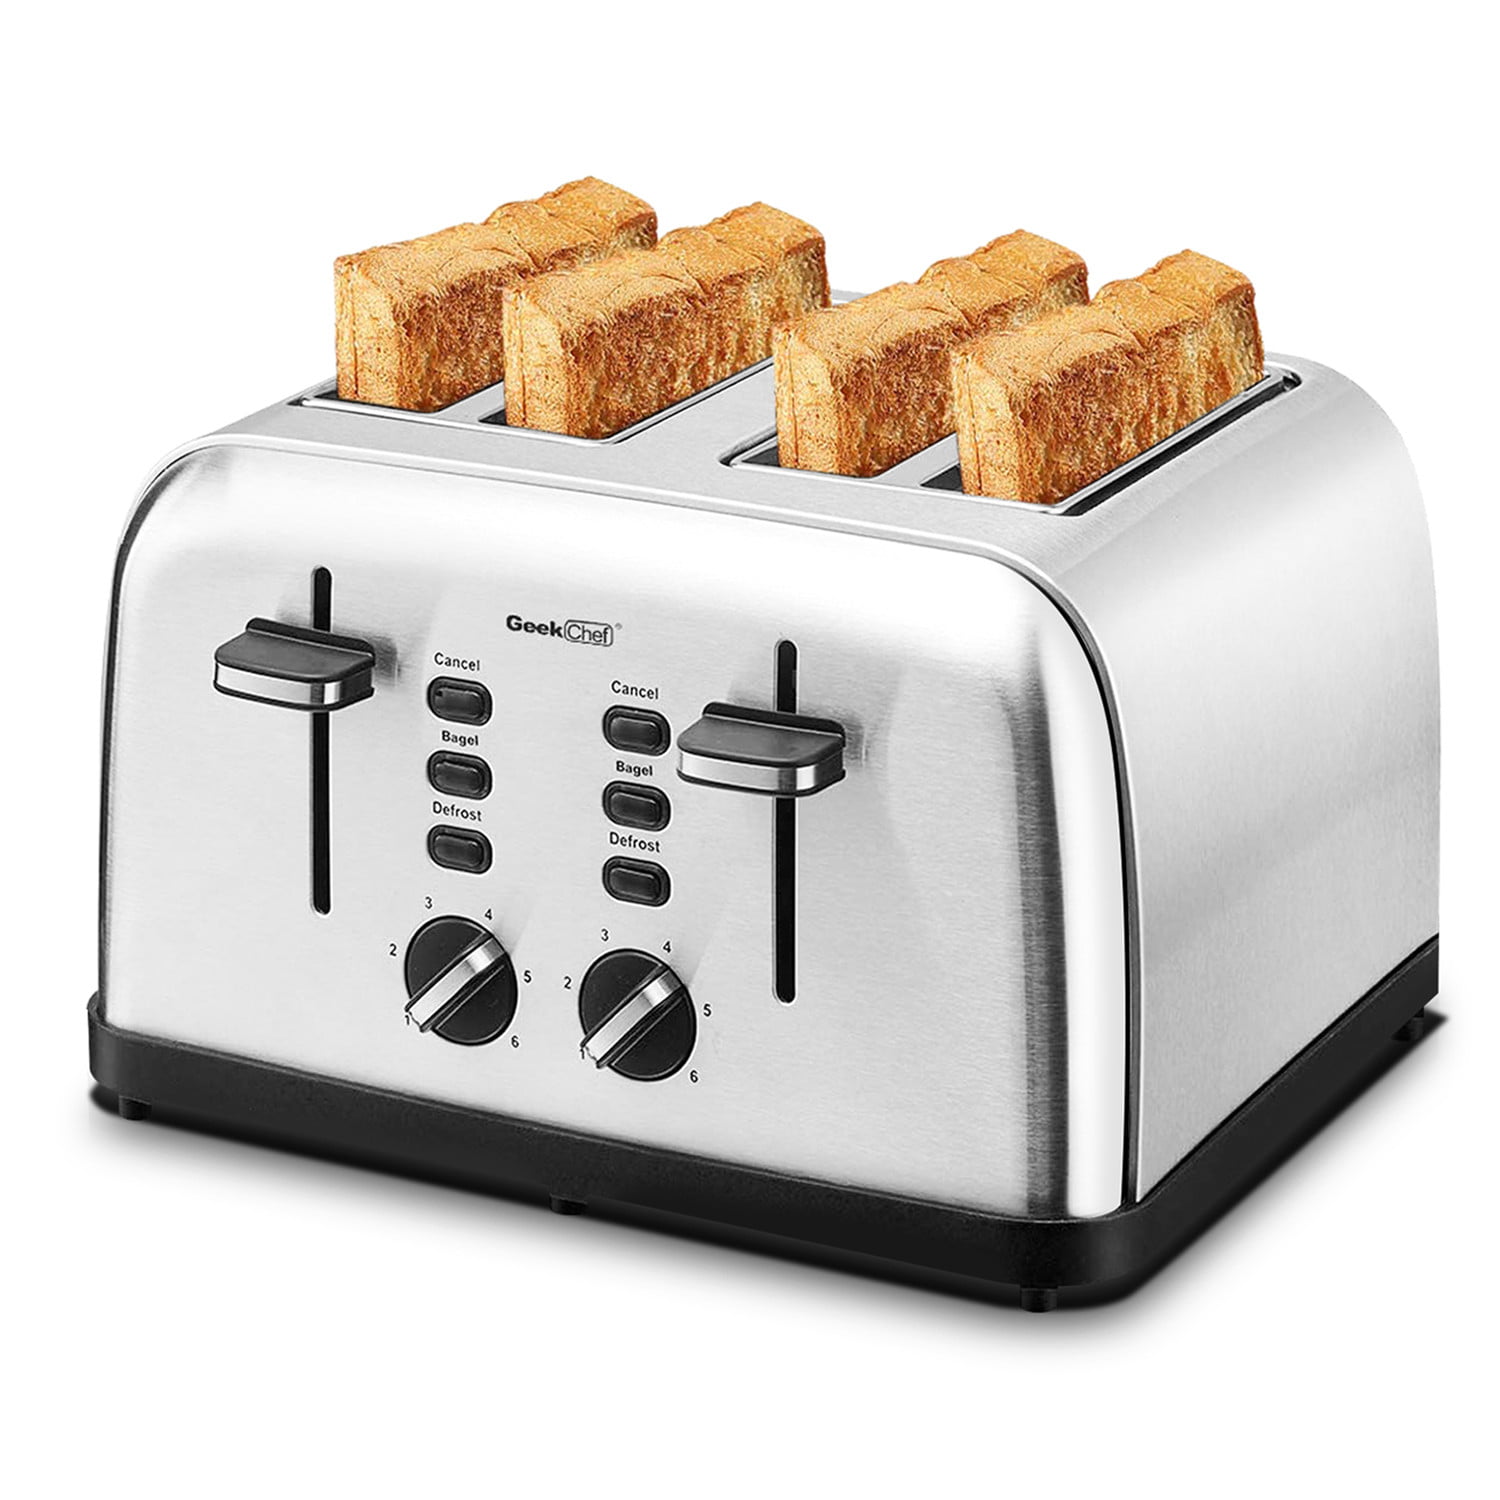 LIVIVO 4 Slice Toaster Extra-Wide Slots Stainless Steel Browning Control Defrost 